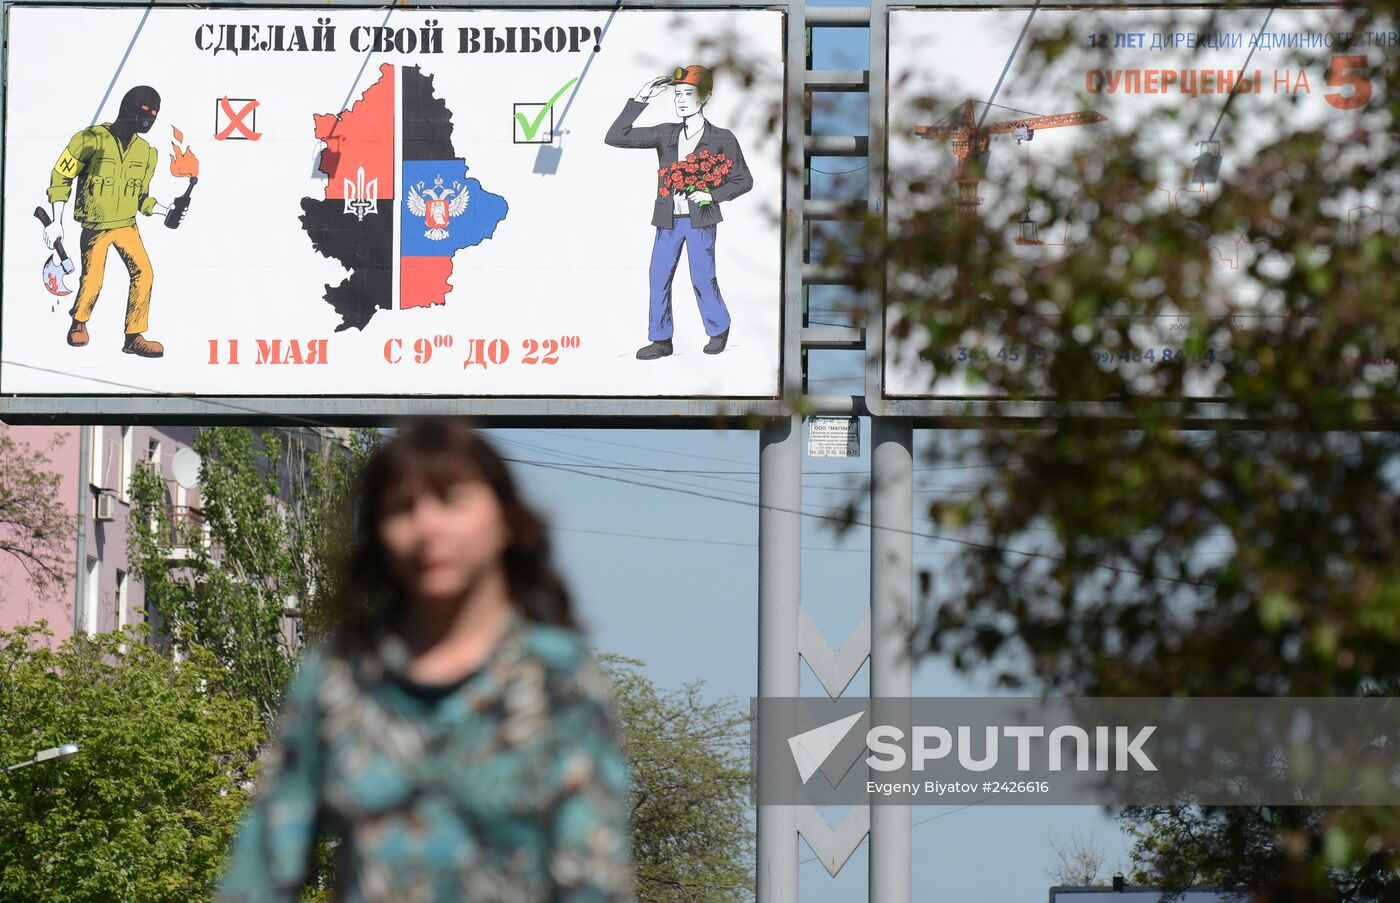 Situation in Donetsk prior to referendum